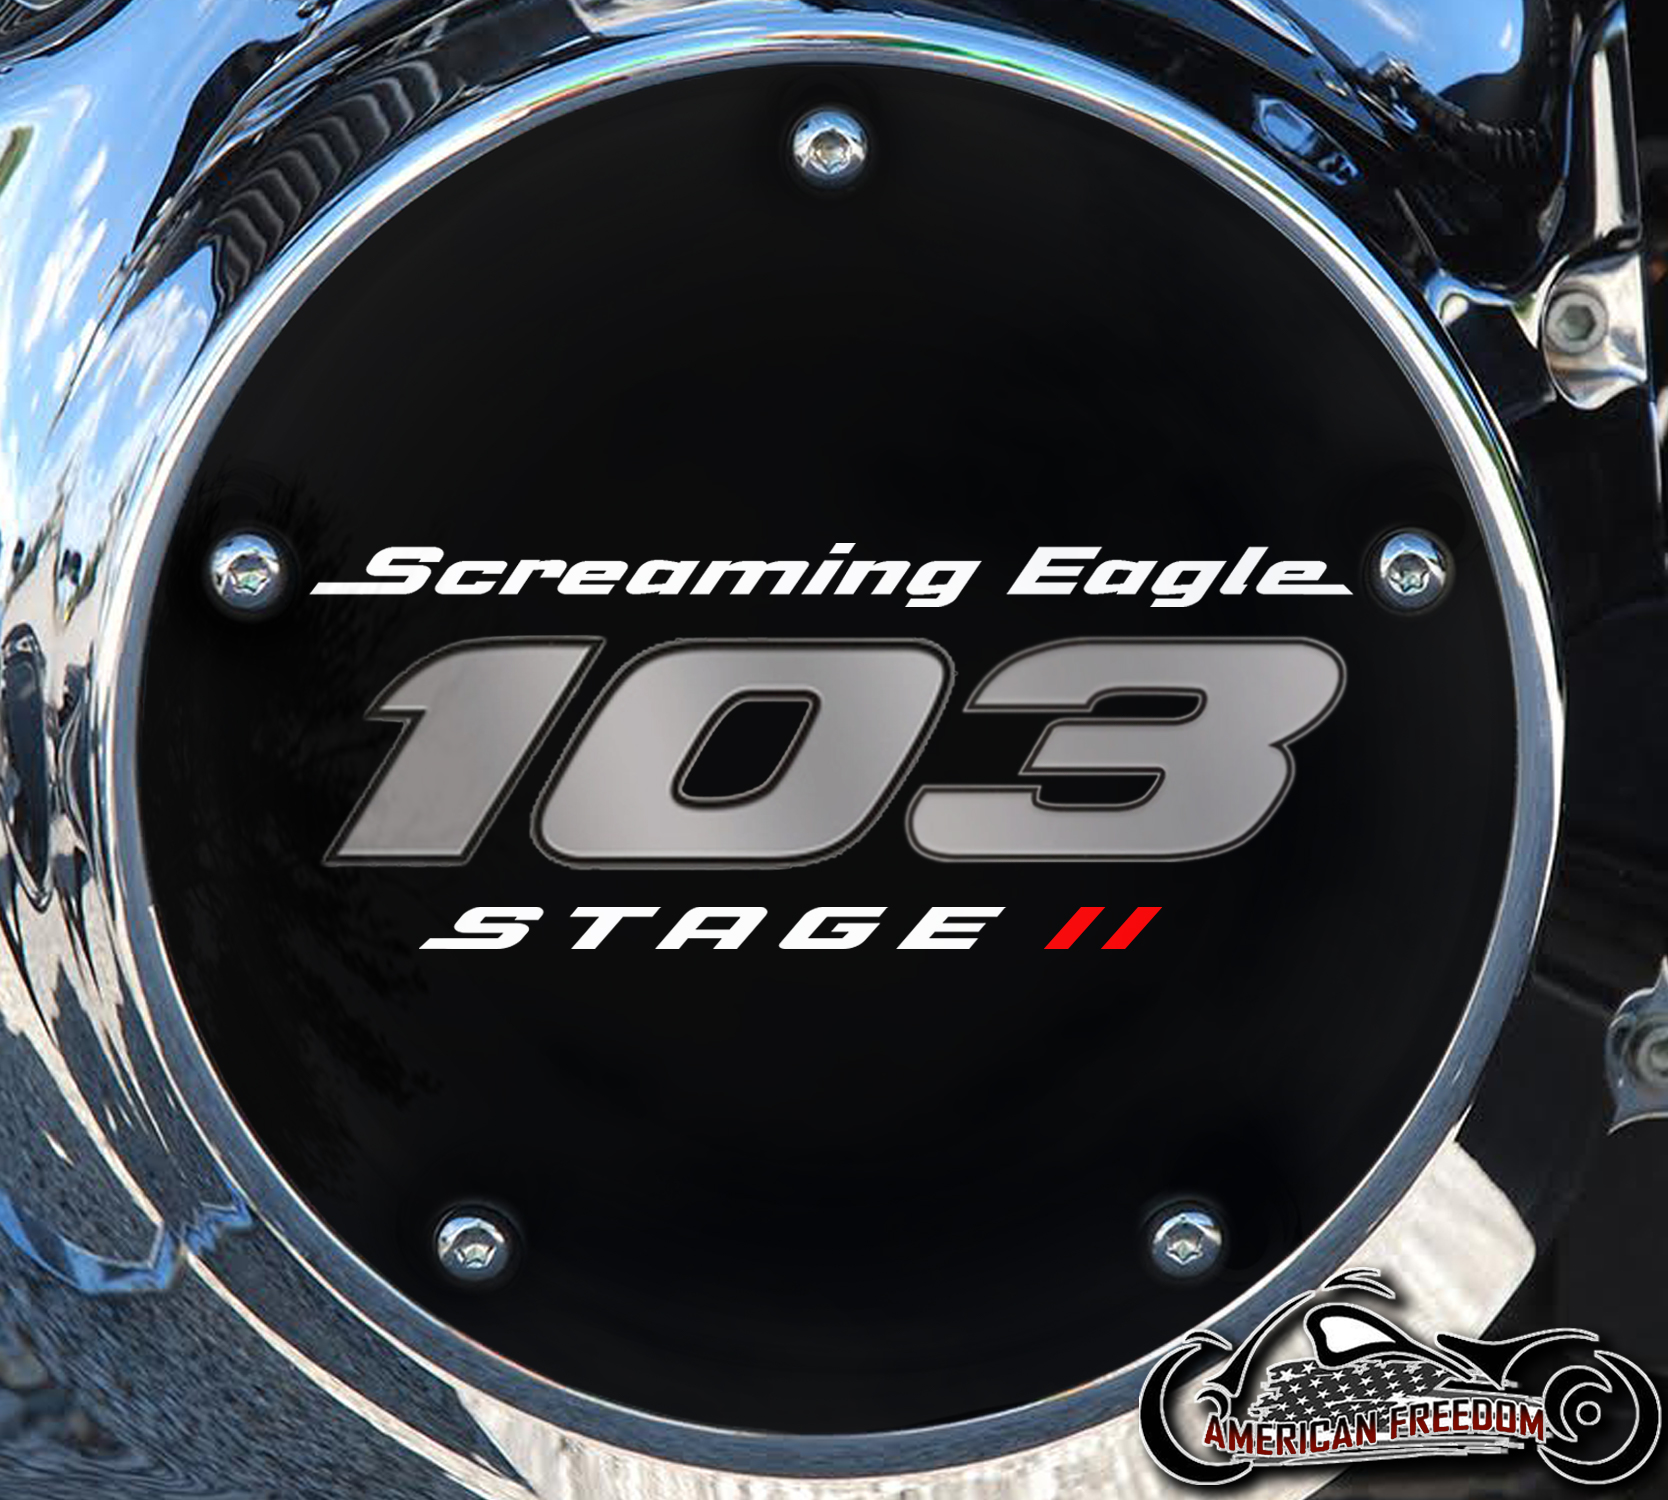 Screaming Eagle Stage II 103 Derby Cover